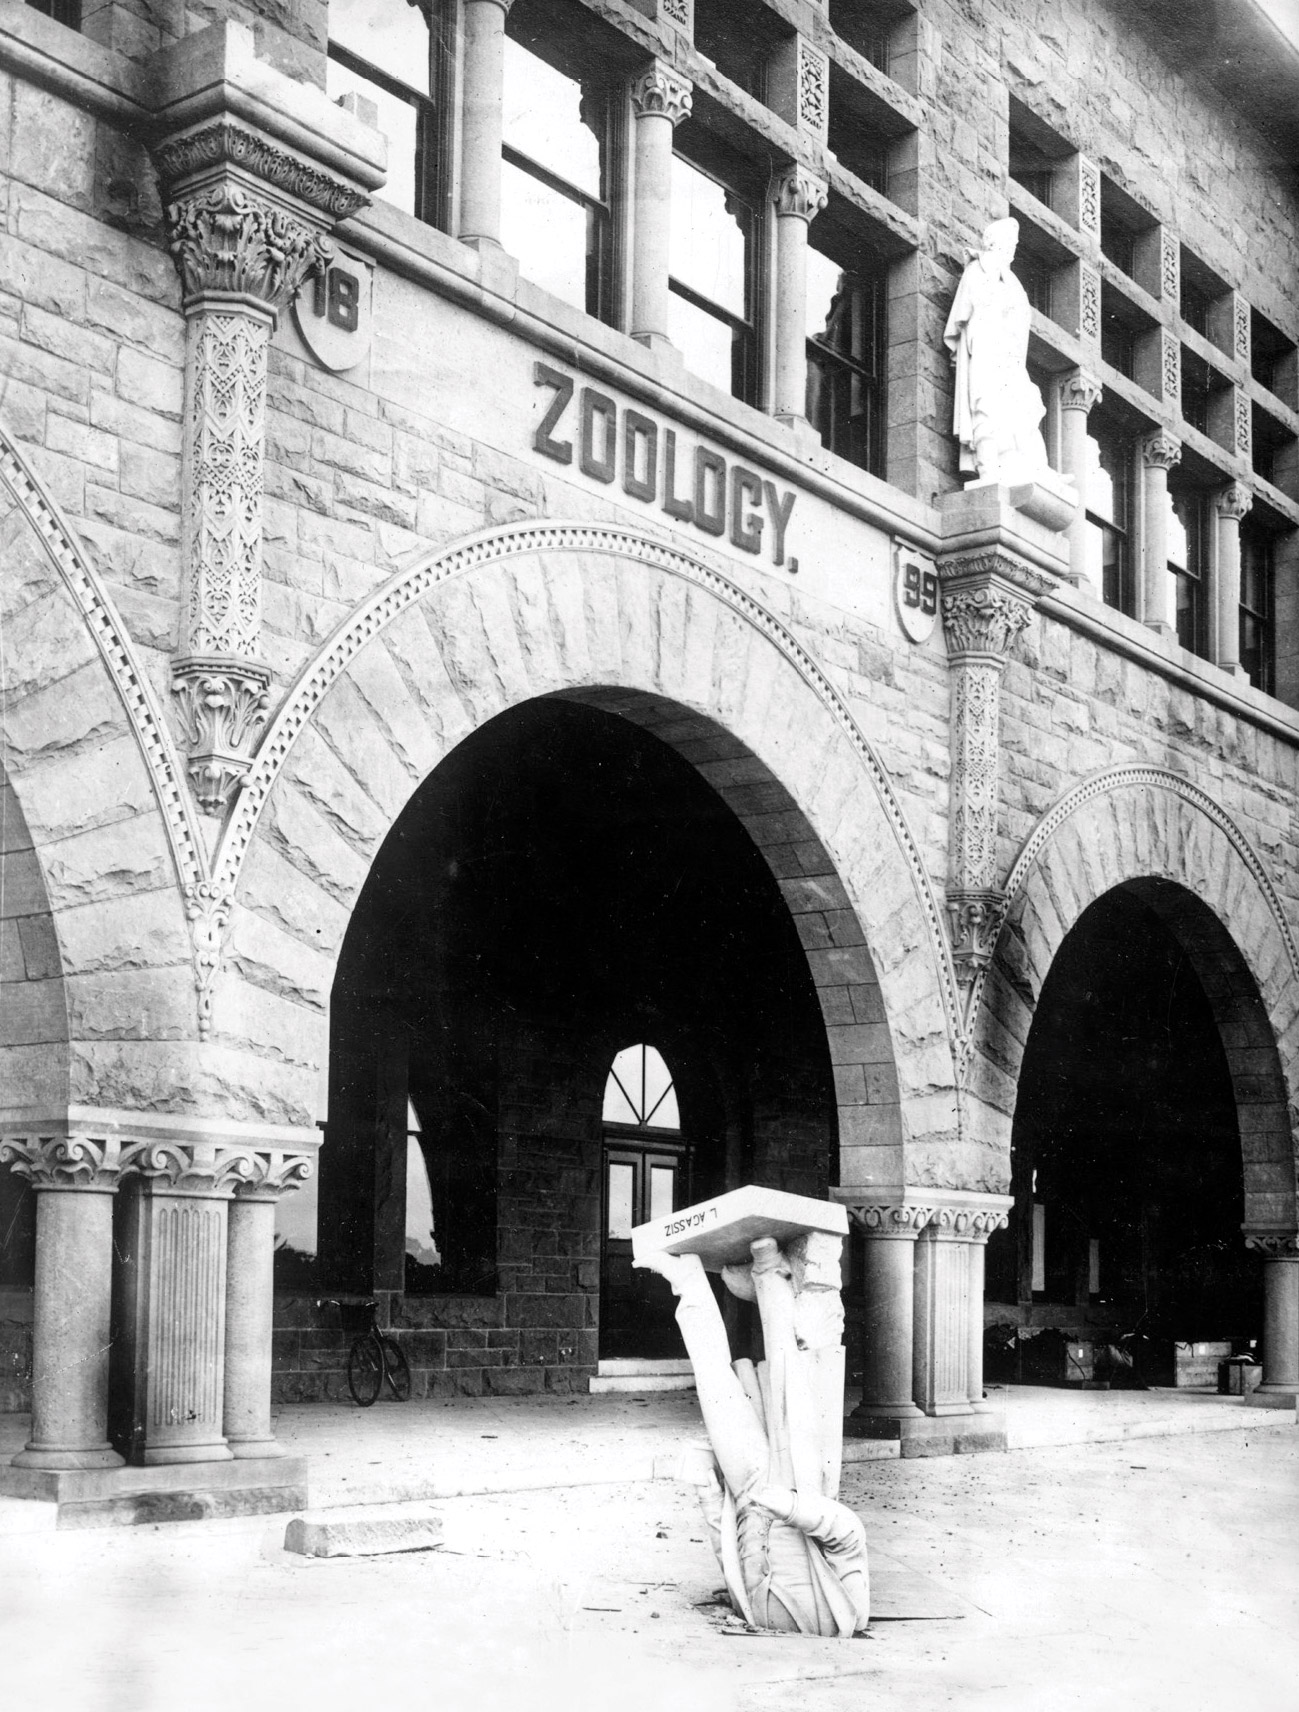 A postcard depicting a photograph of a statue that had toppled headfirst off the Stanford University Zoology building and been wedged into the ground with its feet in the air.